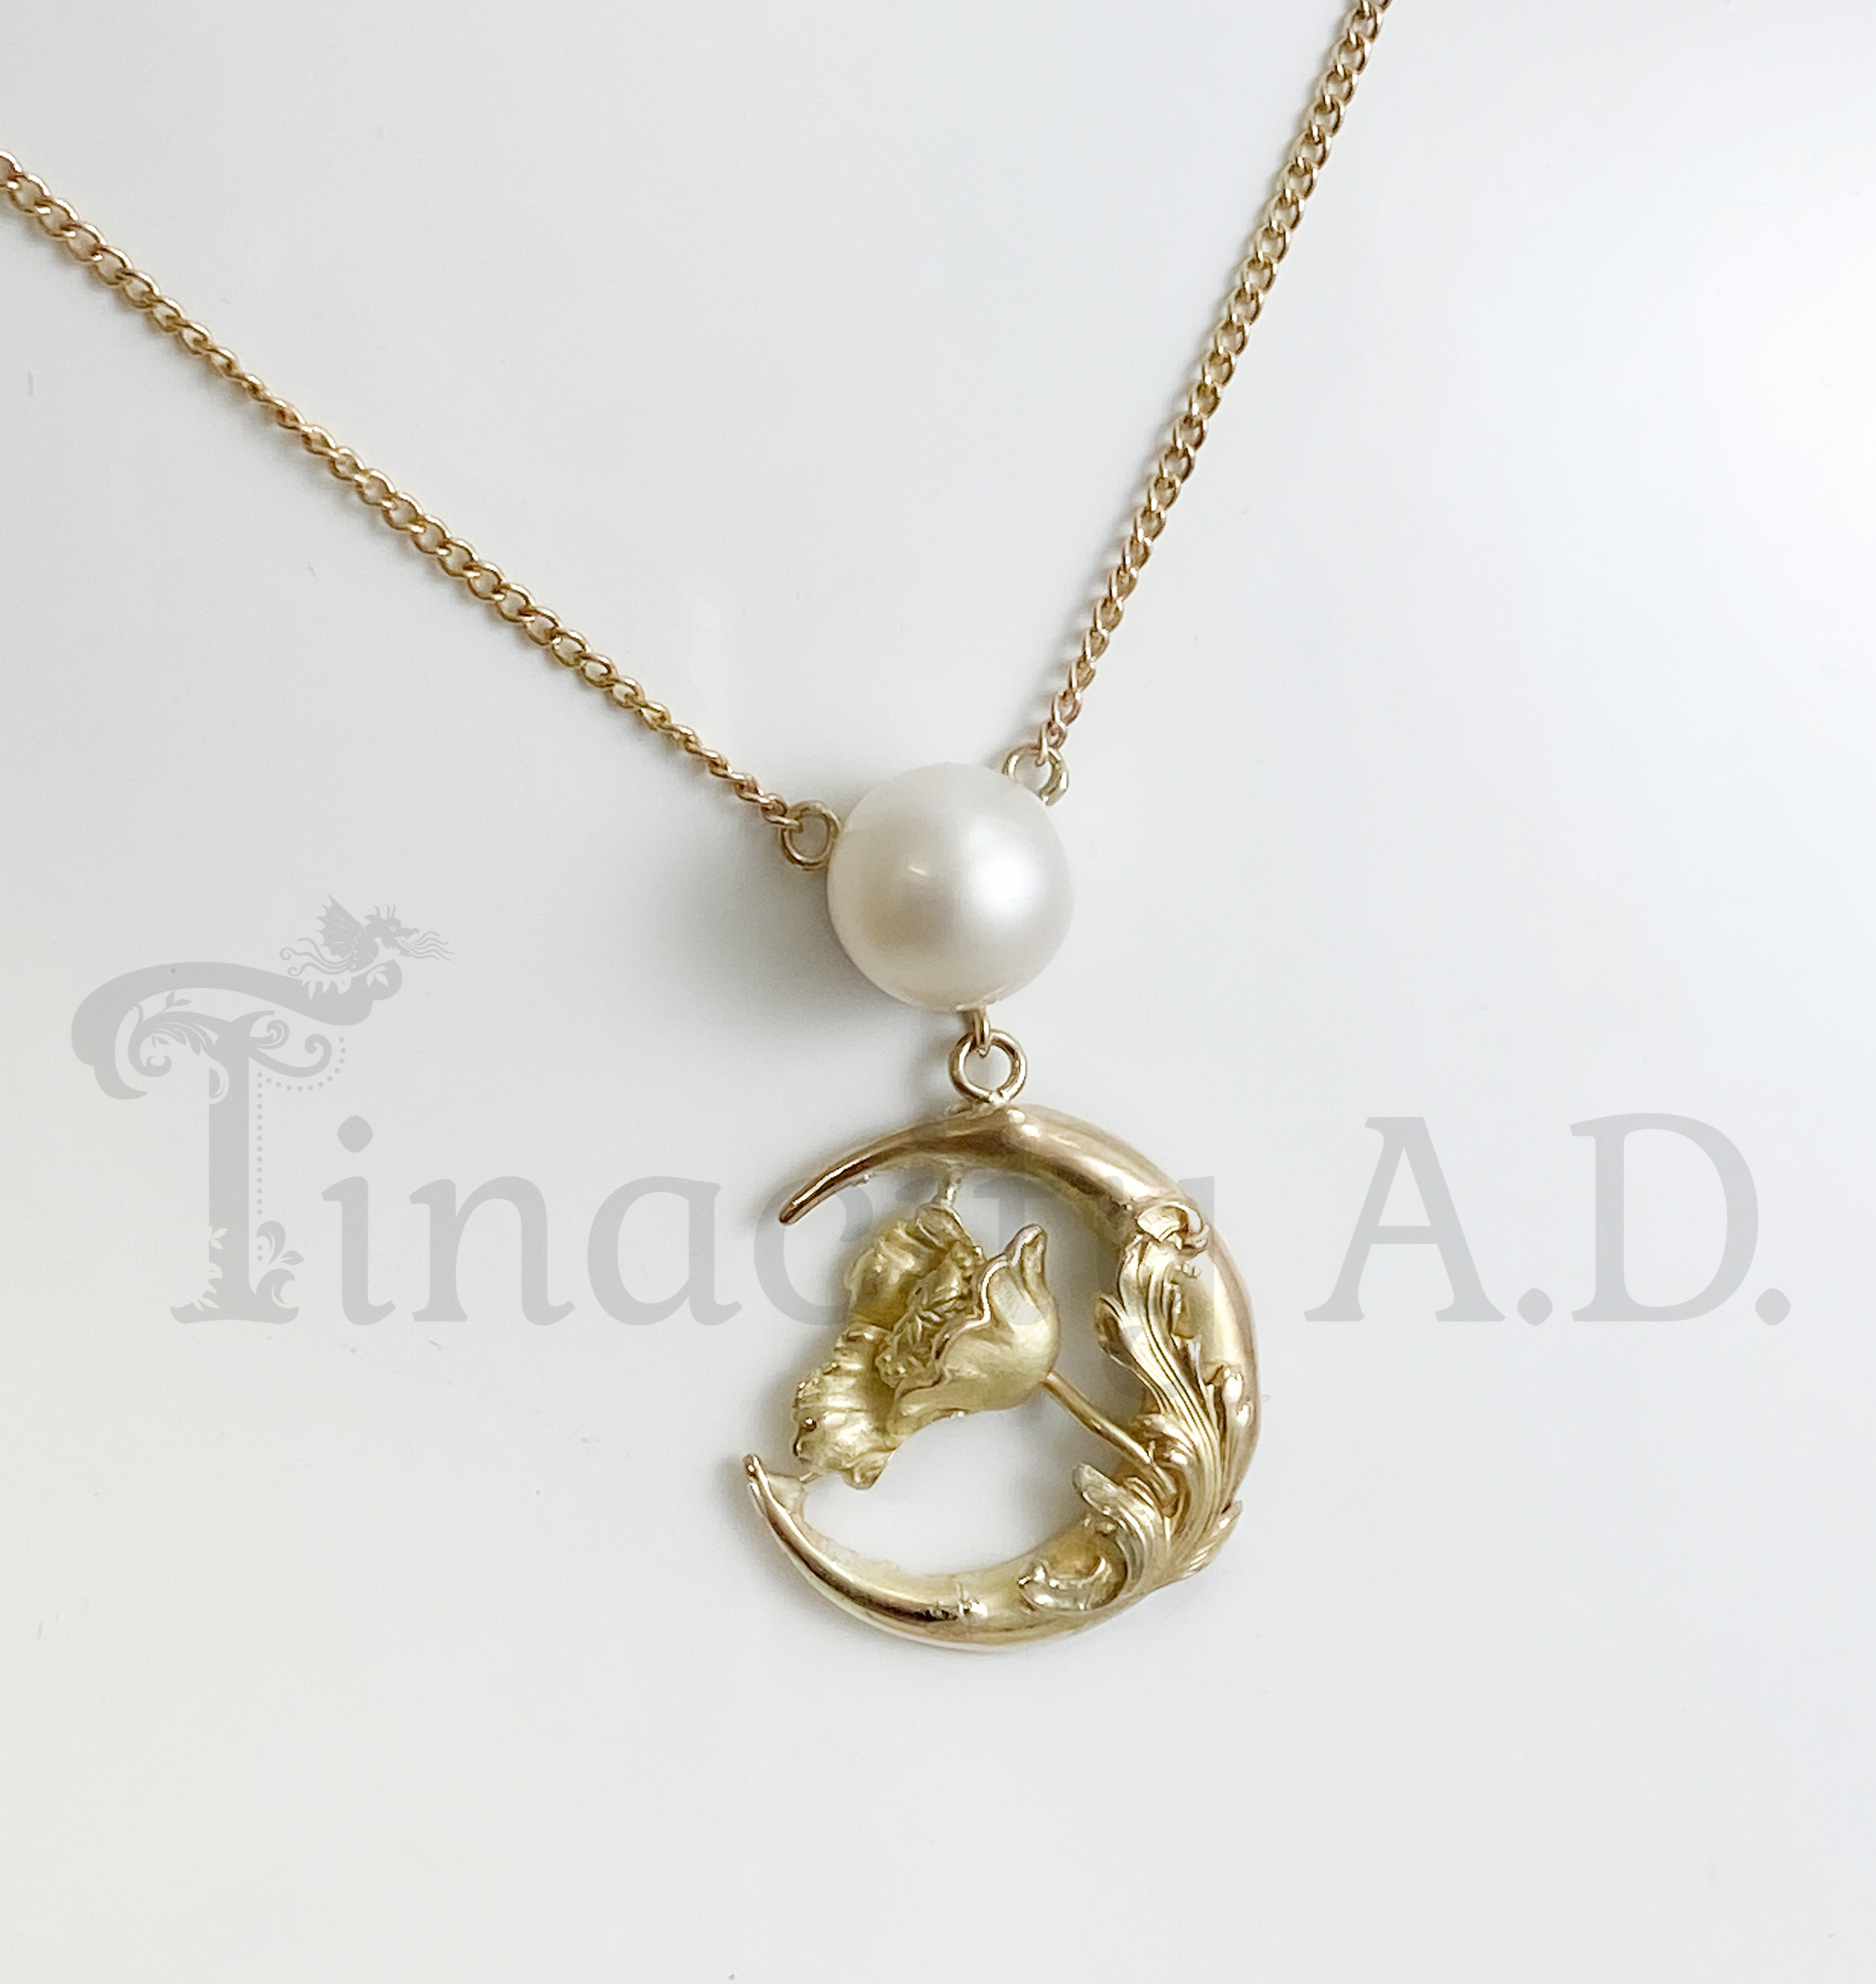 A Vintage Elements Pendant Featuring a Lovely Art Nouveau Crescent Moon and  Poppy Lace Pin as a Pendant with Cultured Pearl Accent, 14k and 10k Yellow 